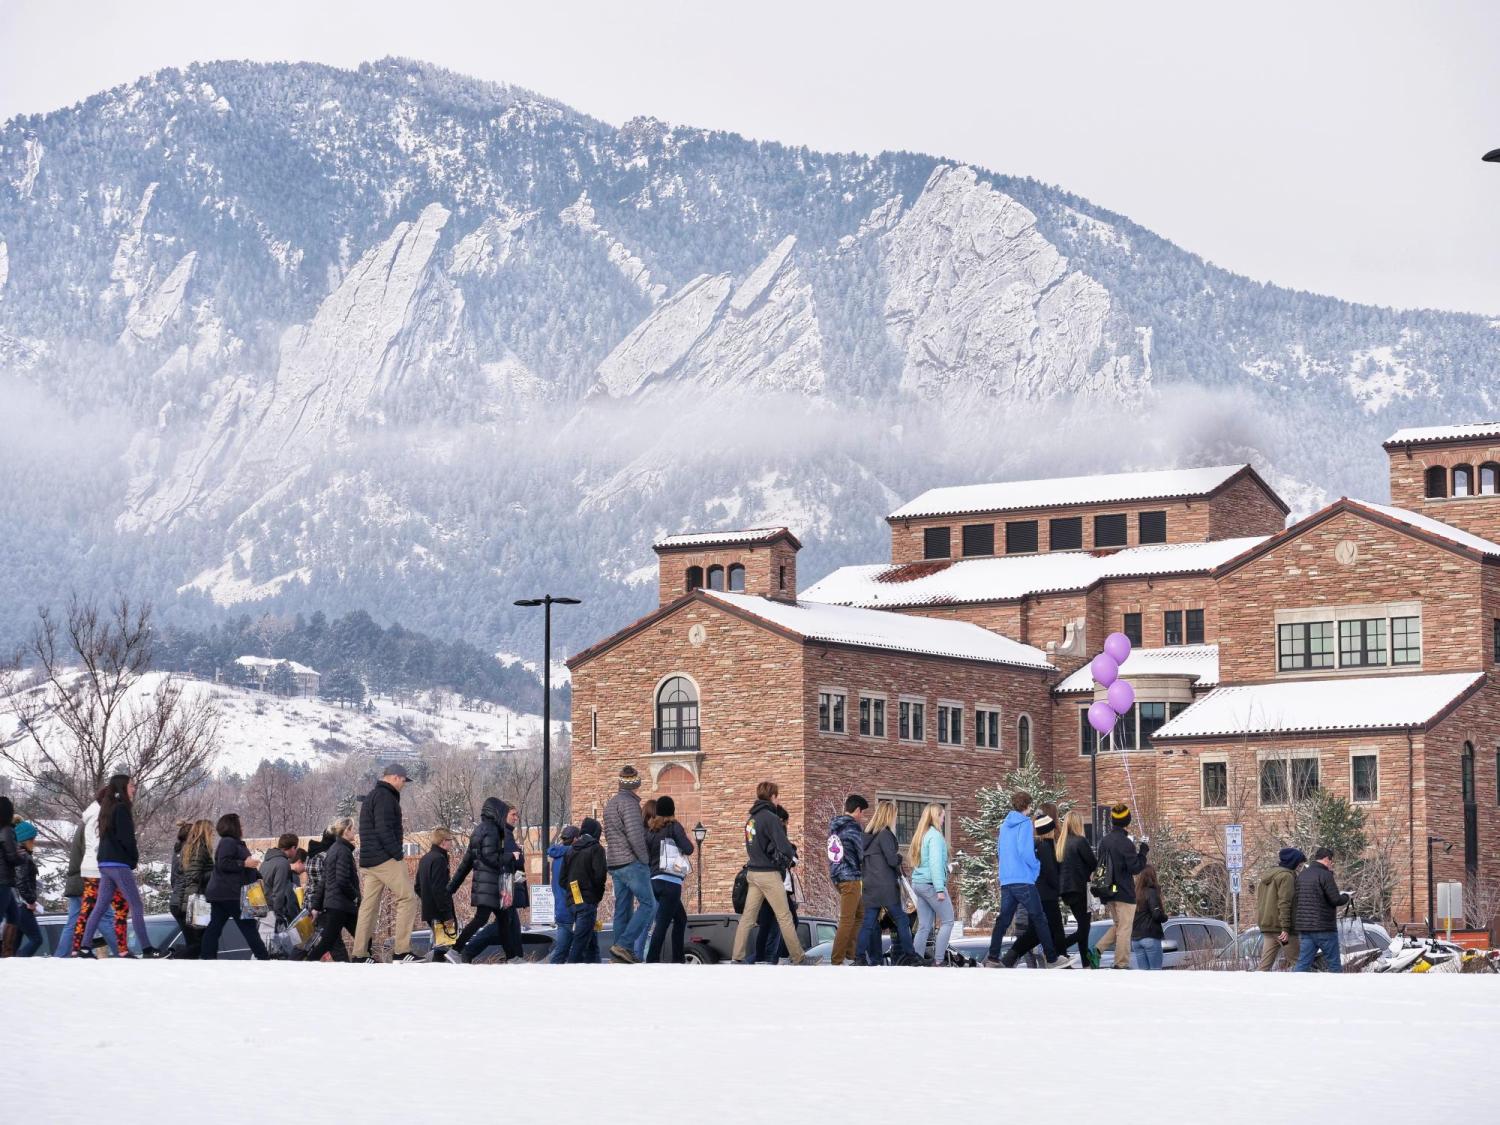 Prospective students tour campus on Admitted Student Day. Photo by Glenn Asakawa.